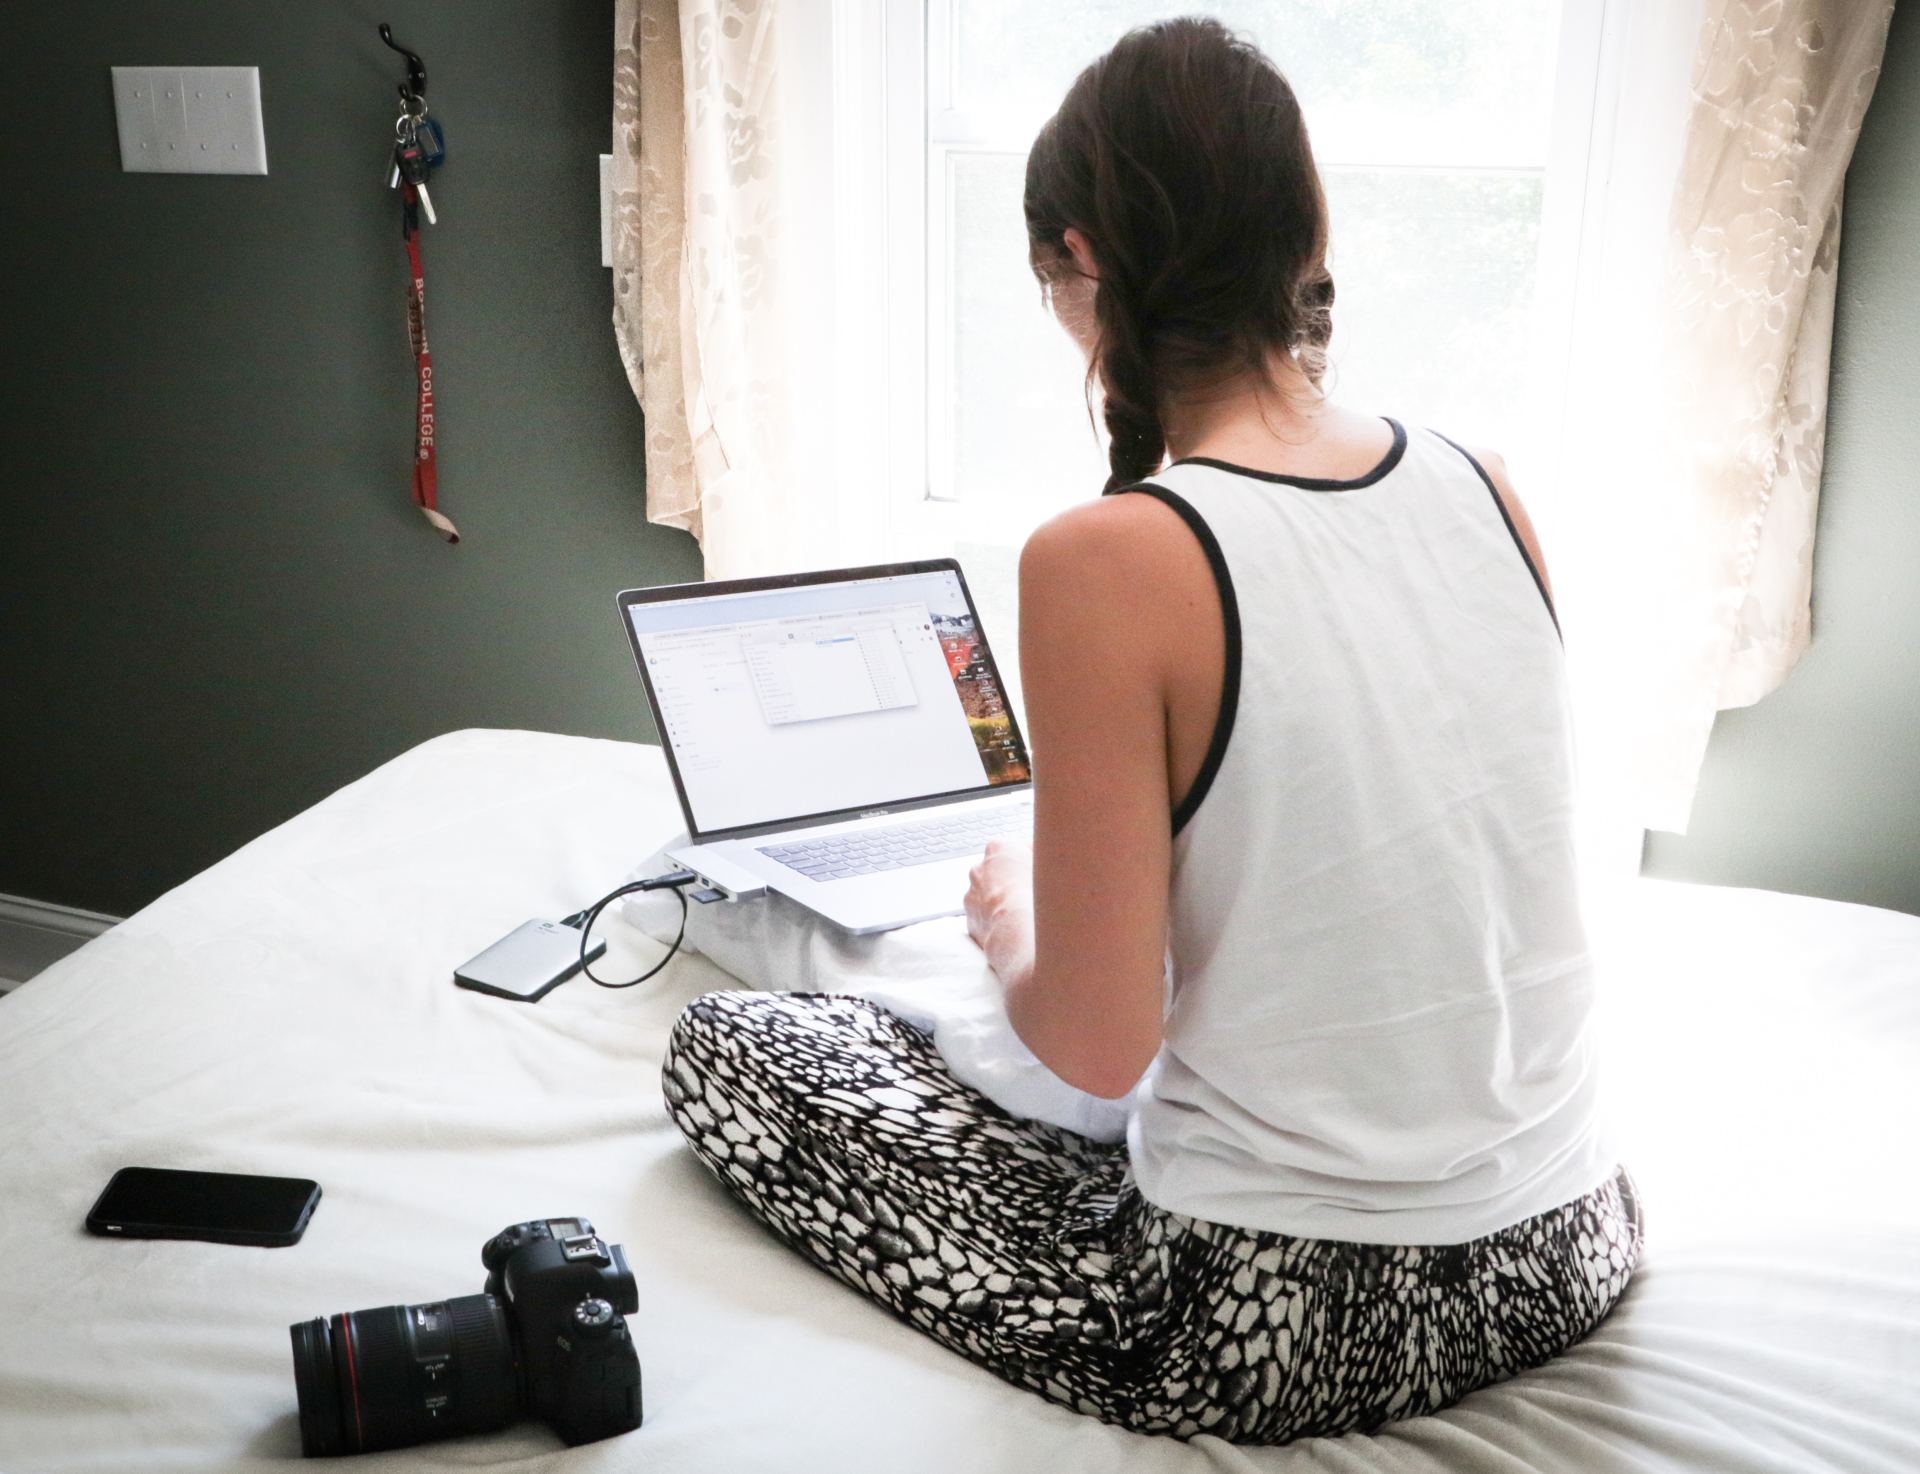 girl sitting on white bed with laptop on pillow and camera next to her searching on computer